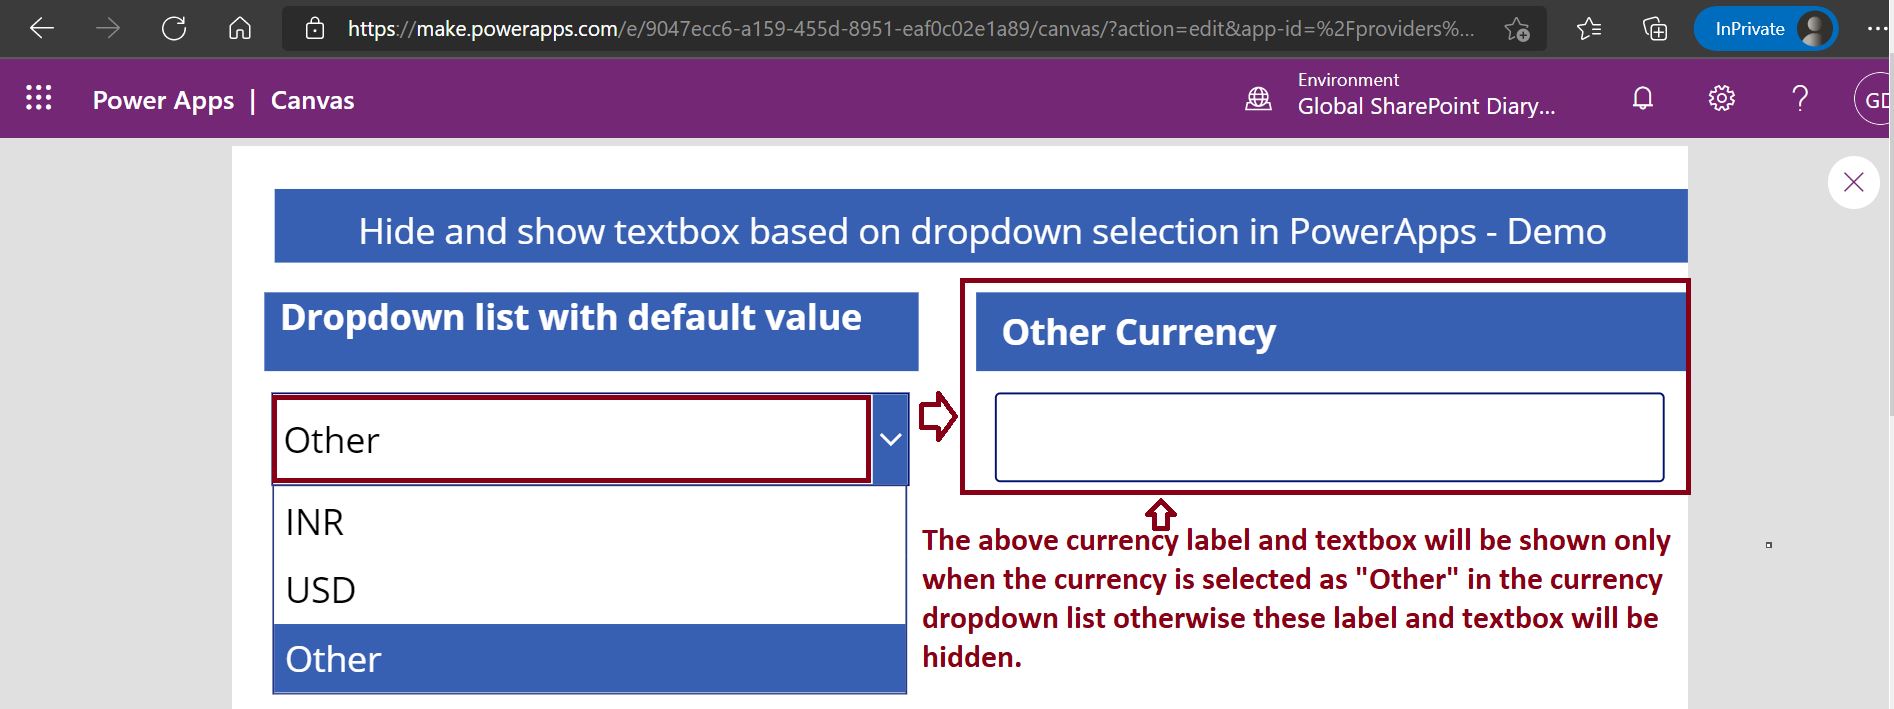 PowerApps hide show fields - Hide and show textbox based on the dropdown list selection in PowerApps - demo